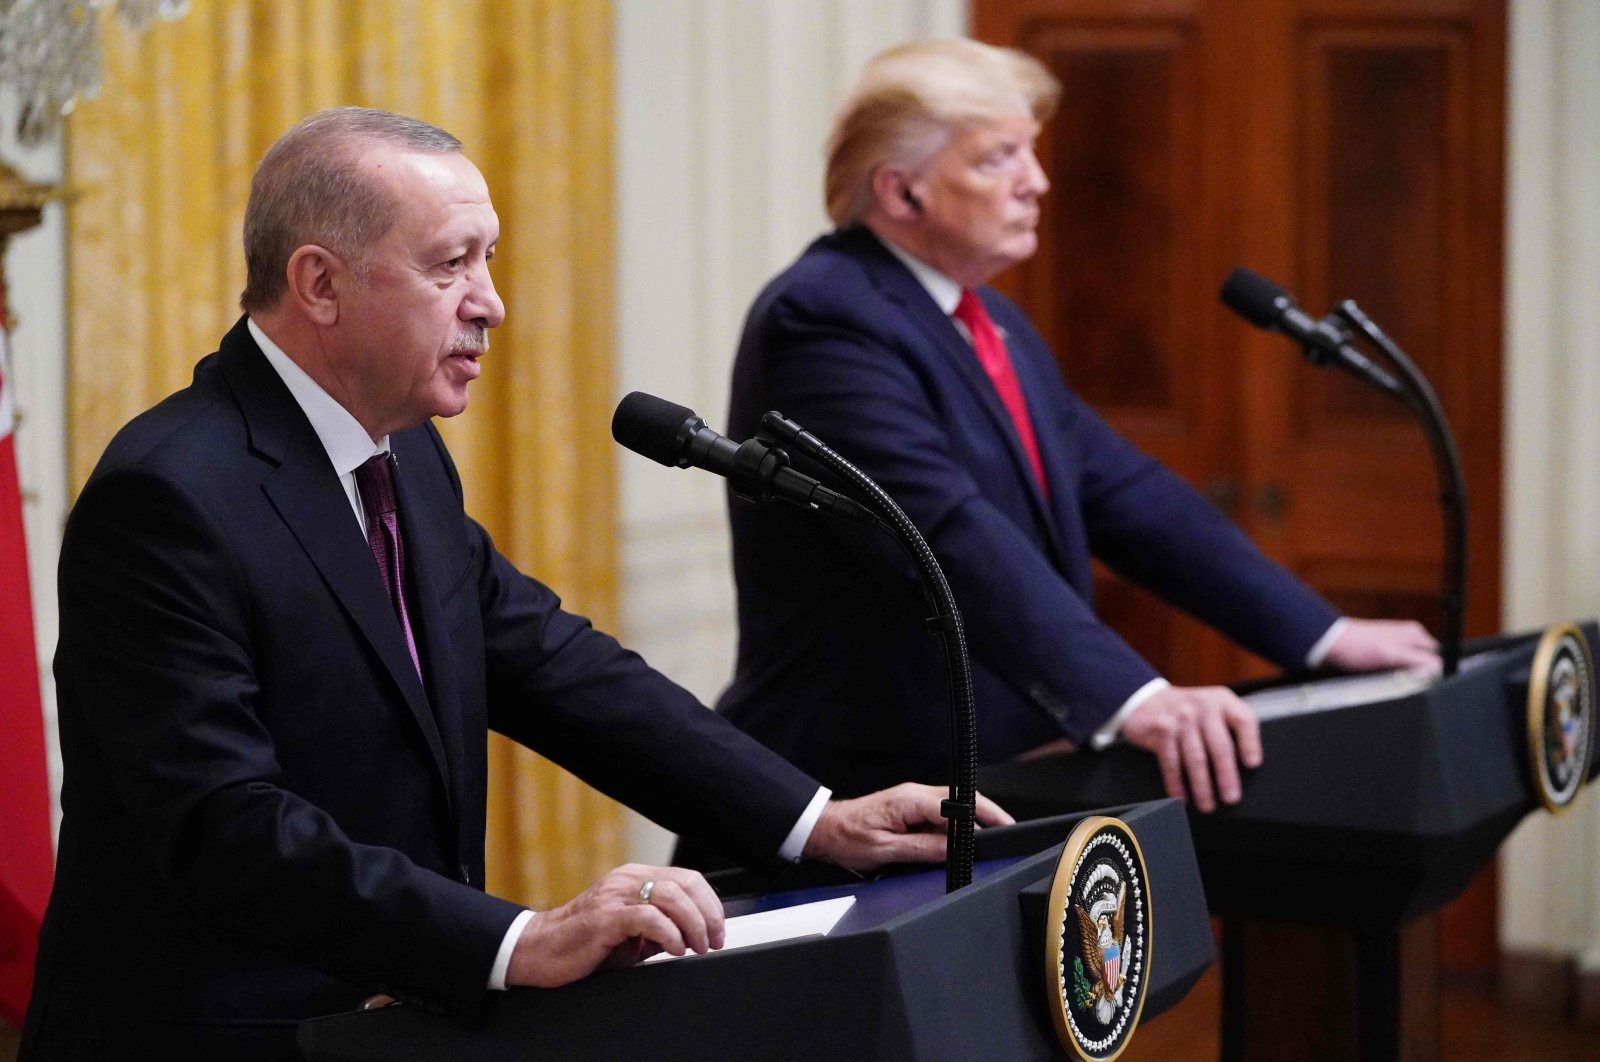 President Recep Tayyip Erdogan and Donald Trump take part in a joint news conference in the East Room of the White House in Washington, D.C., Nov. 13, 2019. (AFP Photo)